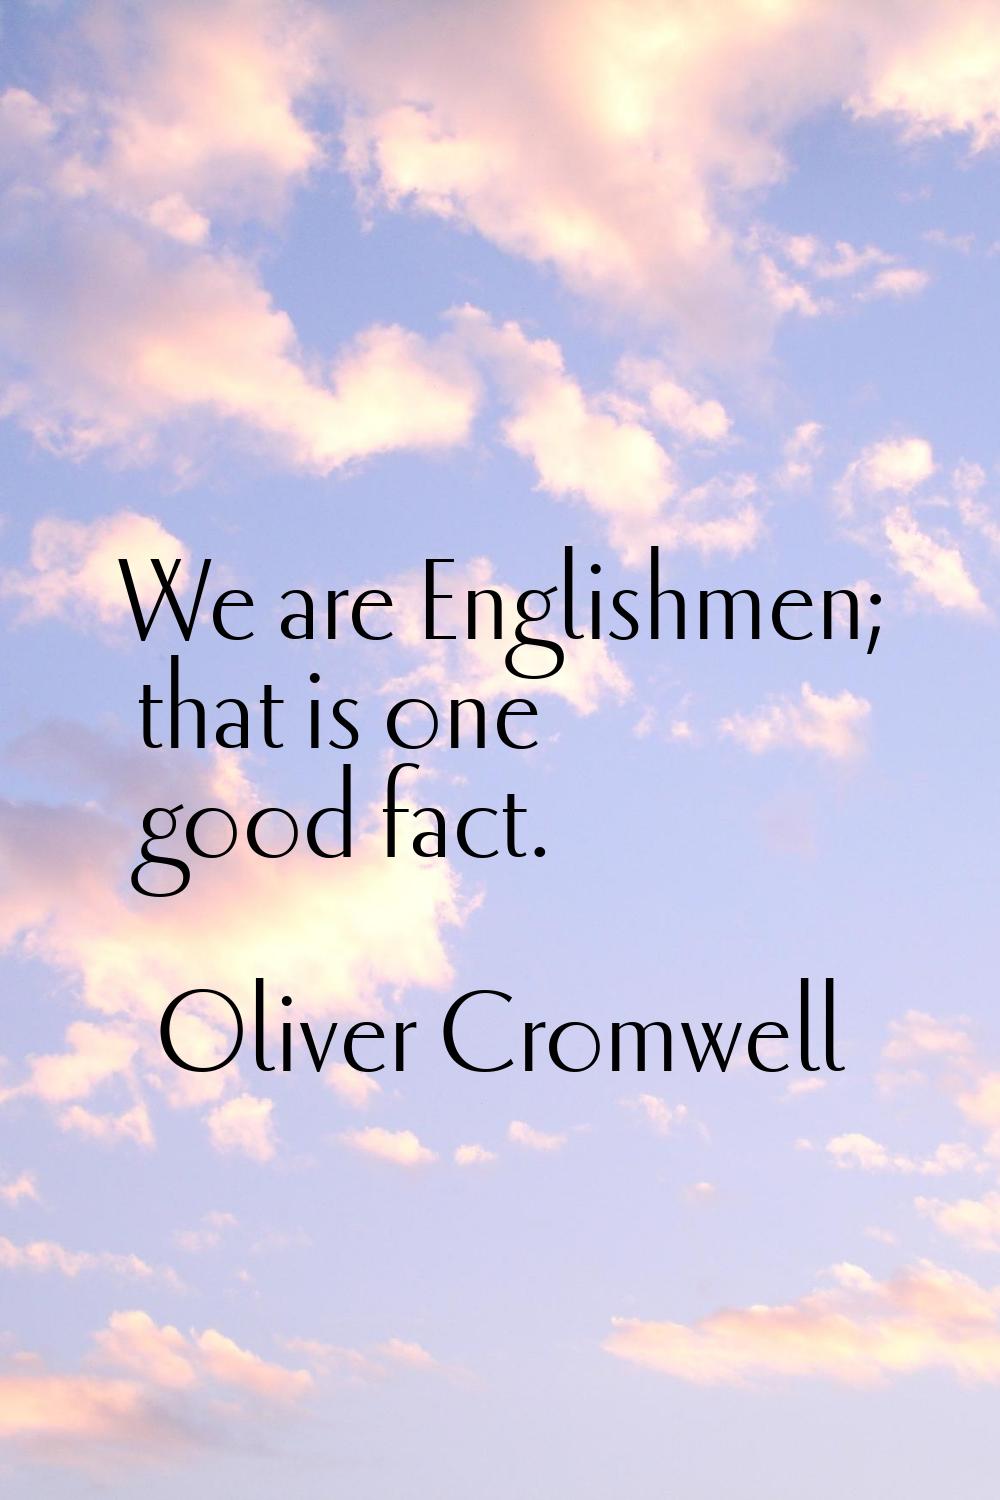 We are Englishmen; that is one good fact.